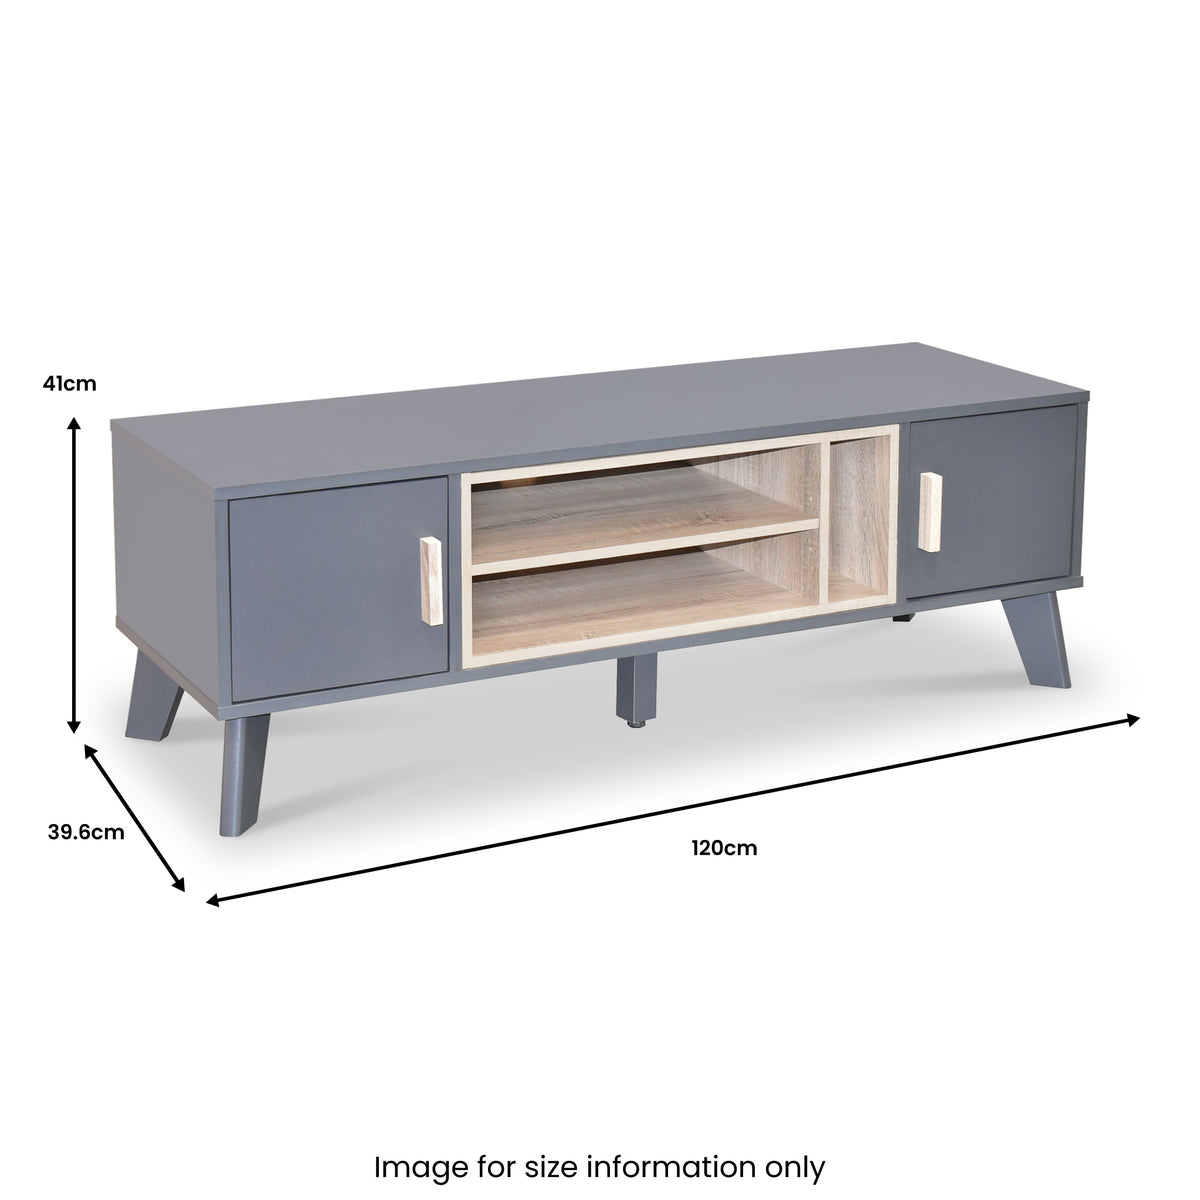 Kelso Grey & Oak TV Stand dimensions